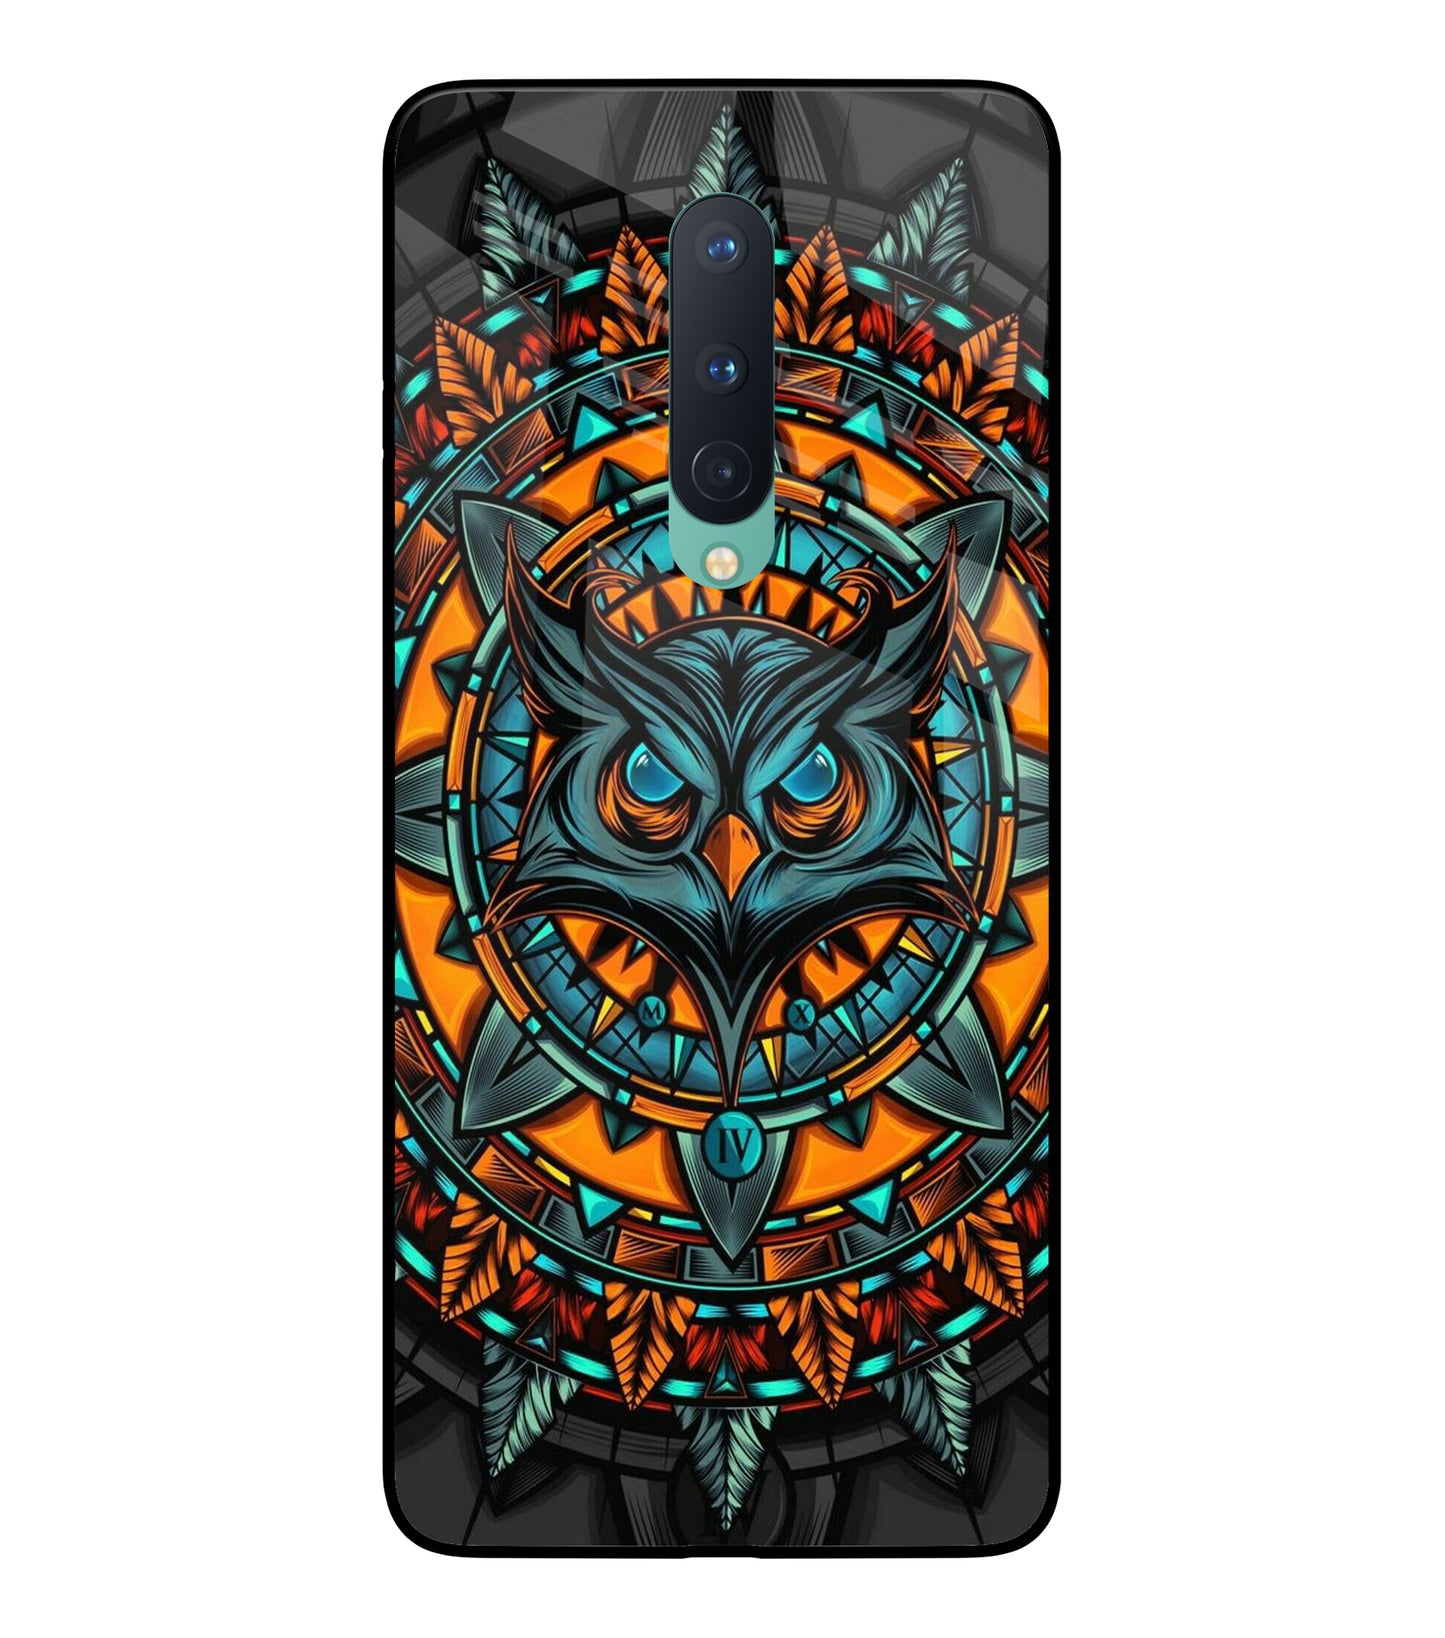 Angry Owl Art Oneplus 8 Glass Cover